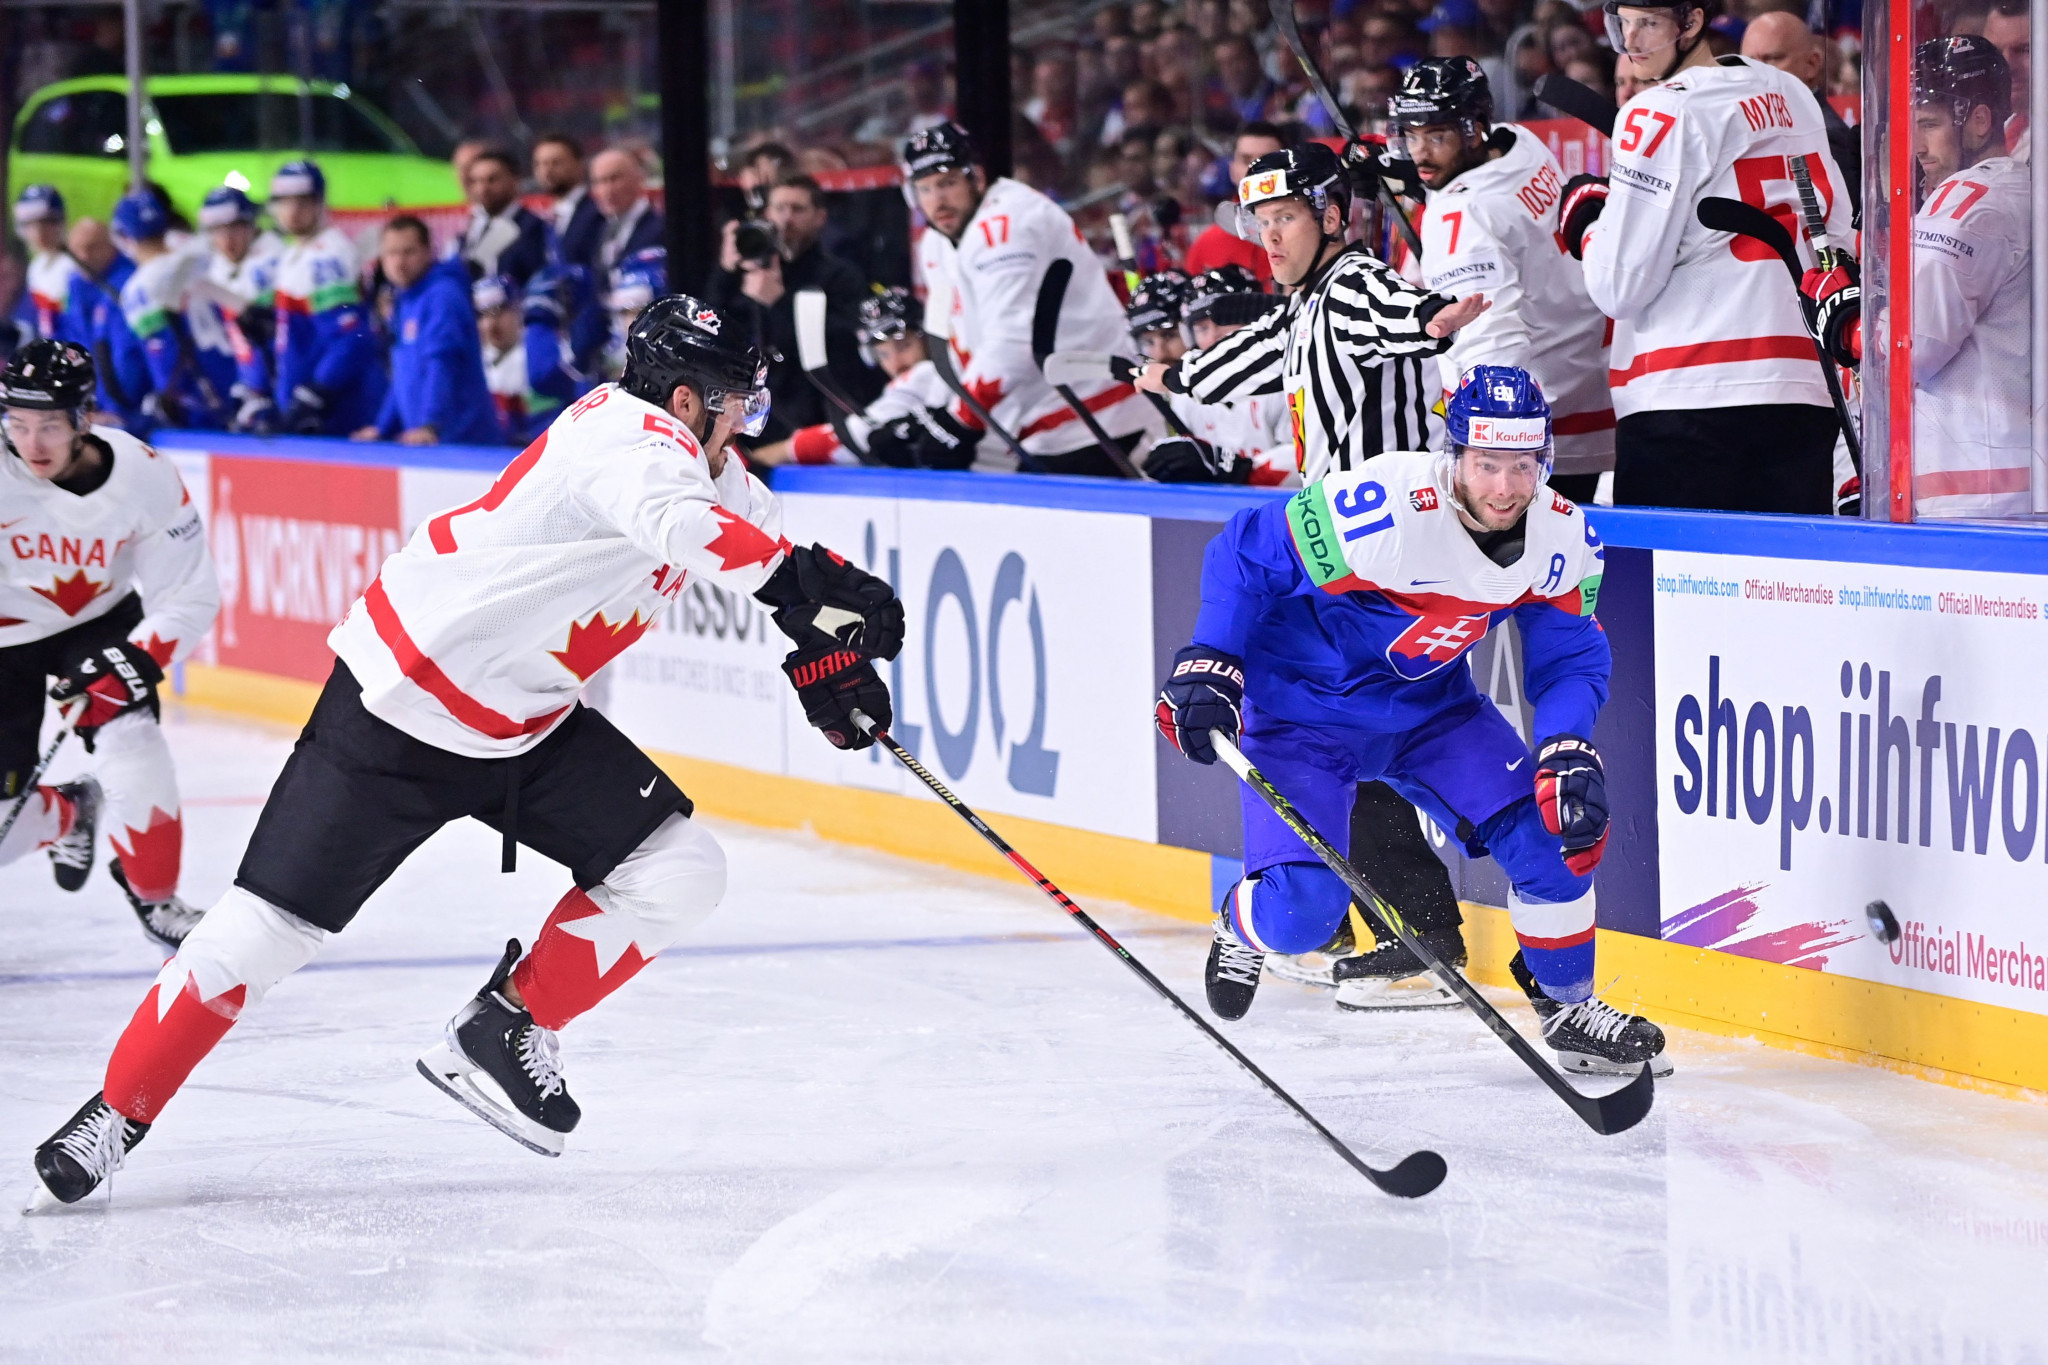 Canada recorded their third victory in three matches at the Ice Hockey World Championship - but Slovakia made them work hard ©Getty Images